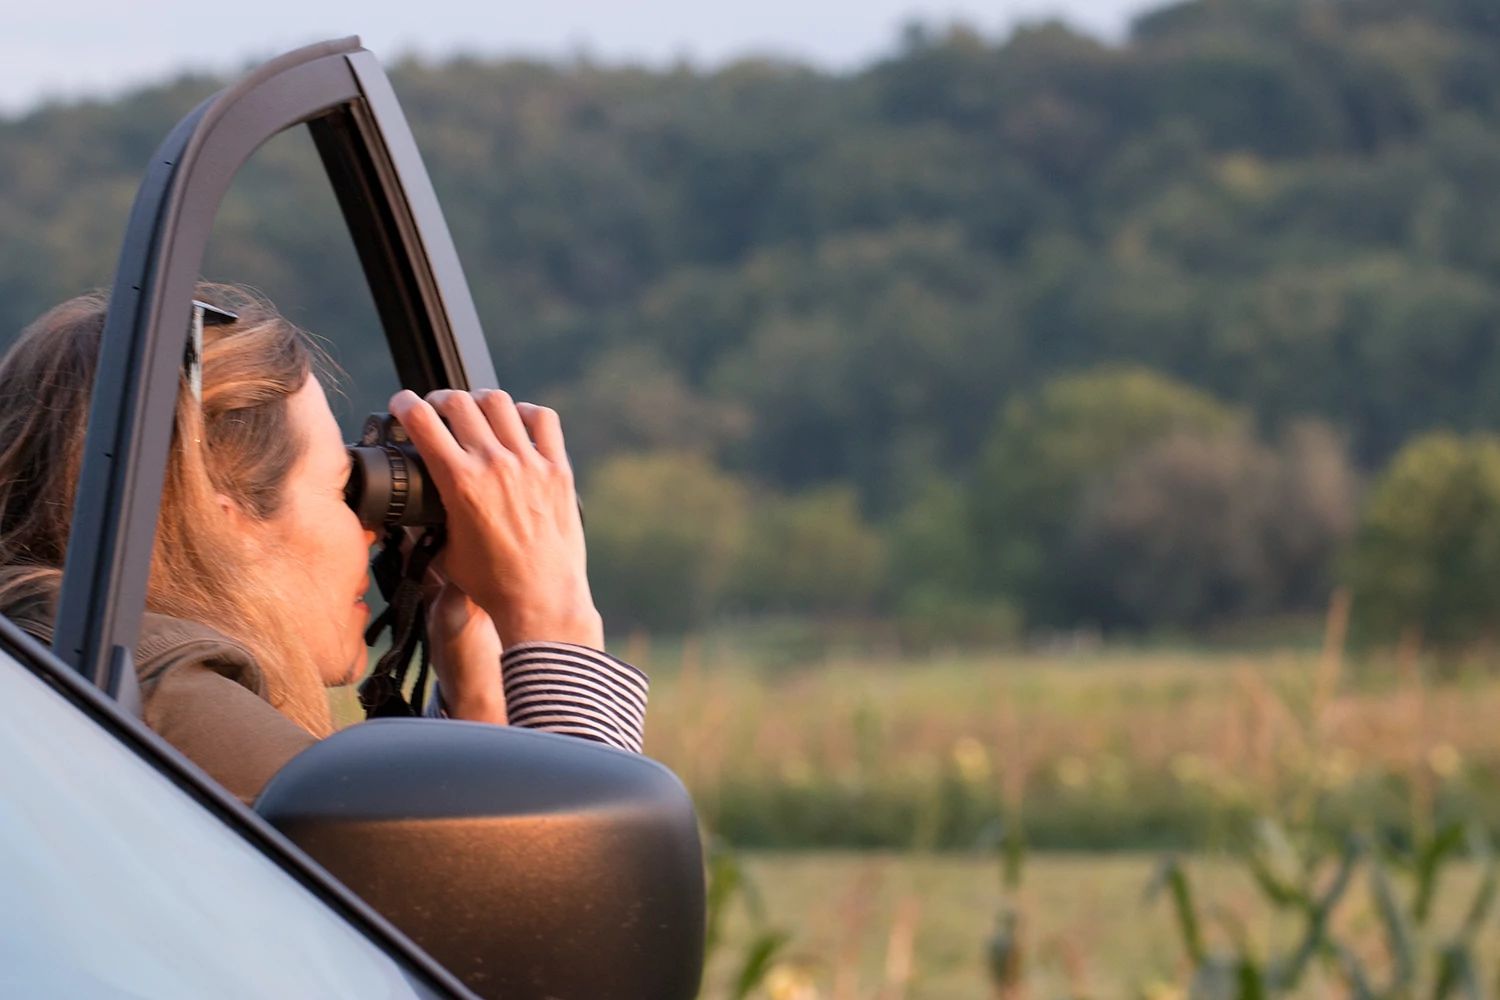 An image of a woman looking through binoculars while sitting in a vehicle.